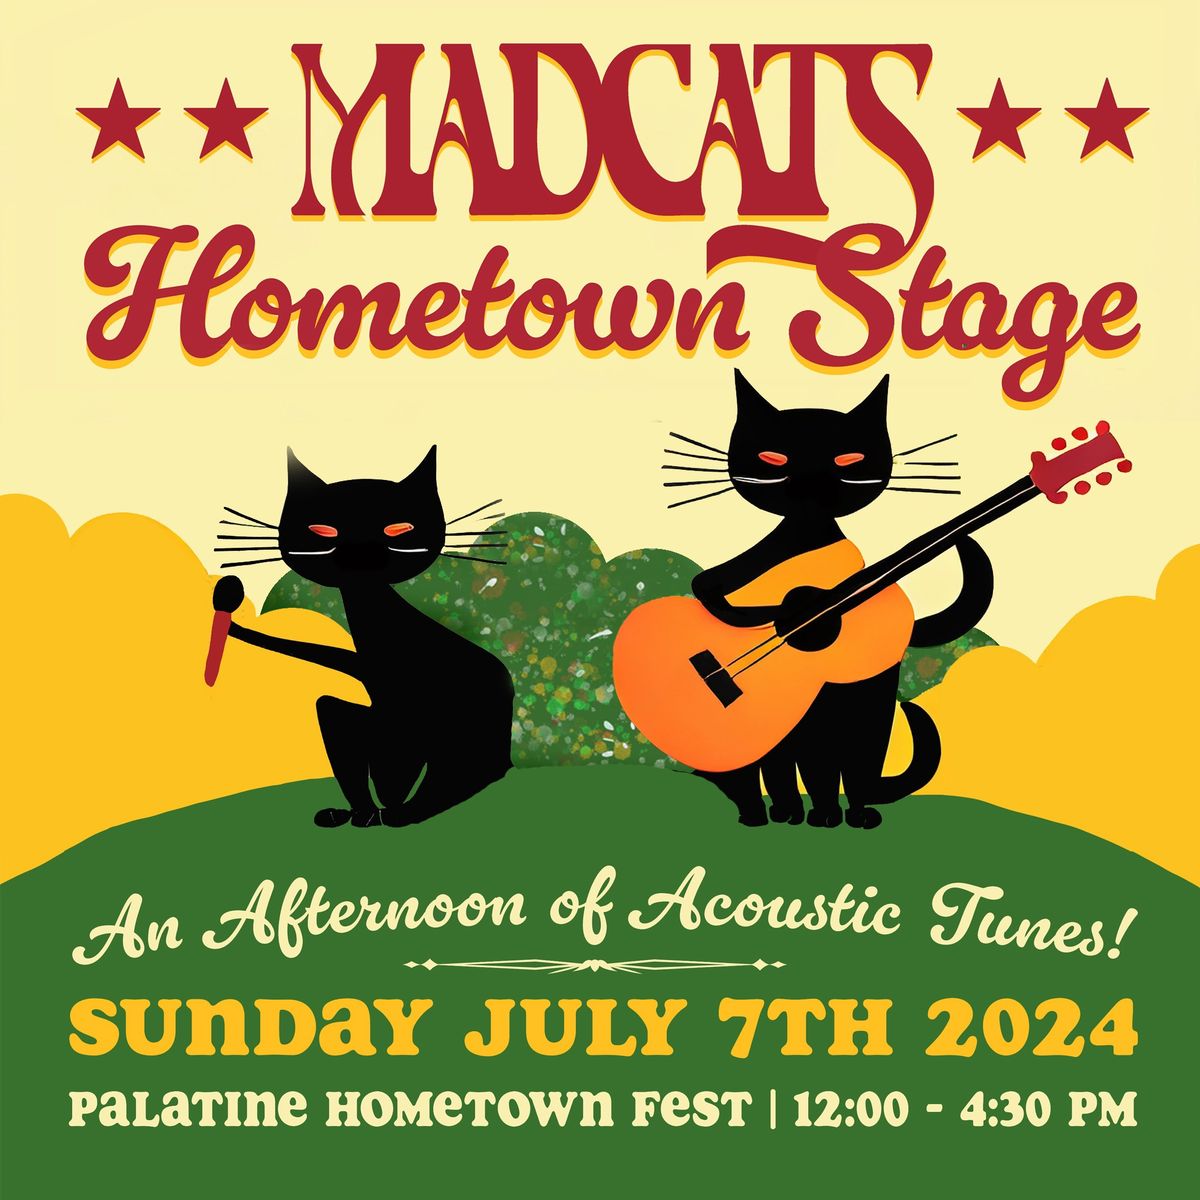 Madcats Stage @ Palatine Hometown Fest 